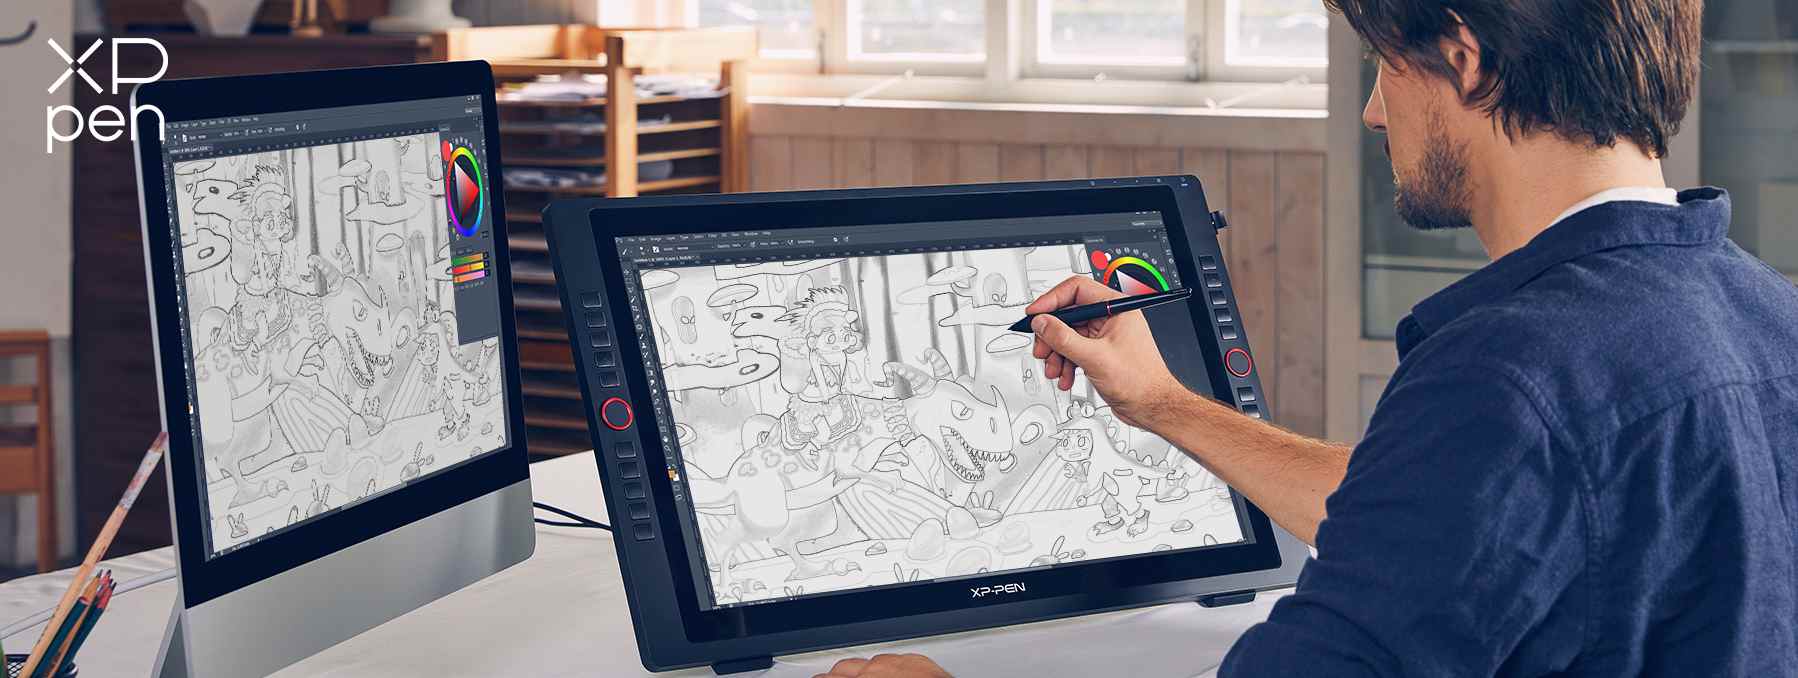 considerations when buying drawing tablets with screen